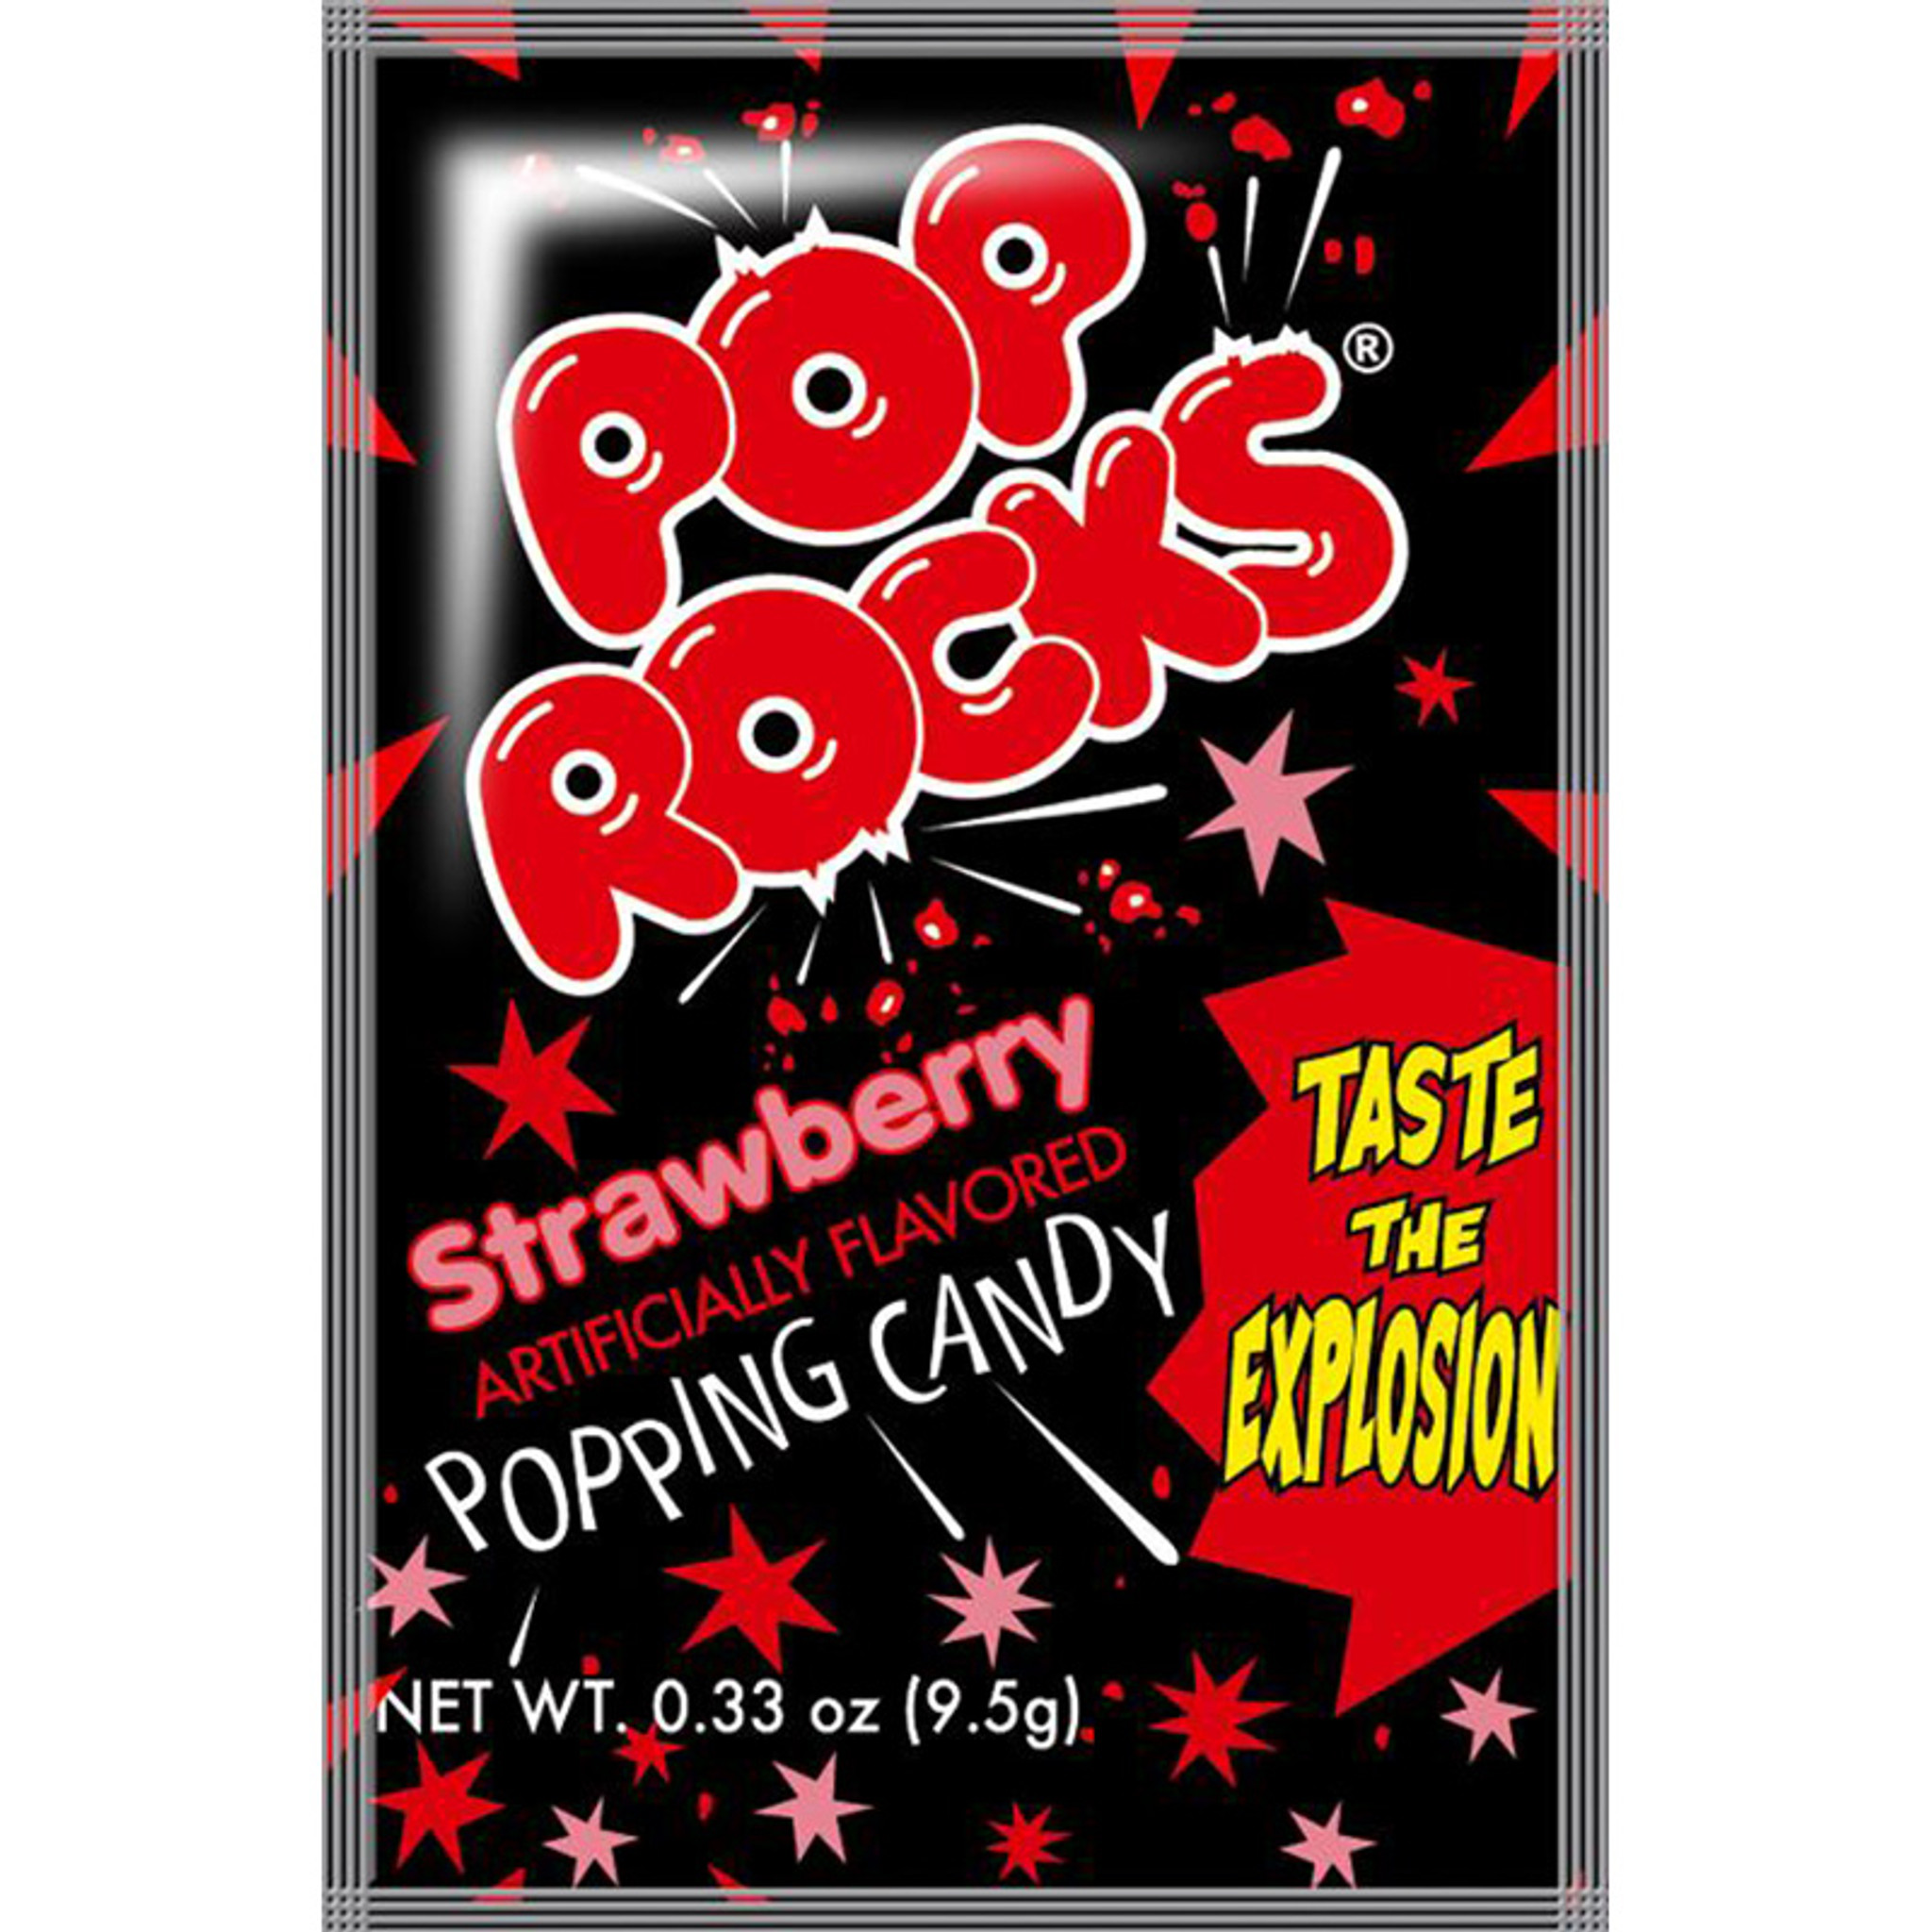 Best of Pop rocks and oral sex